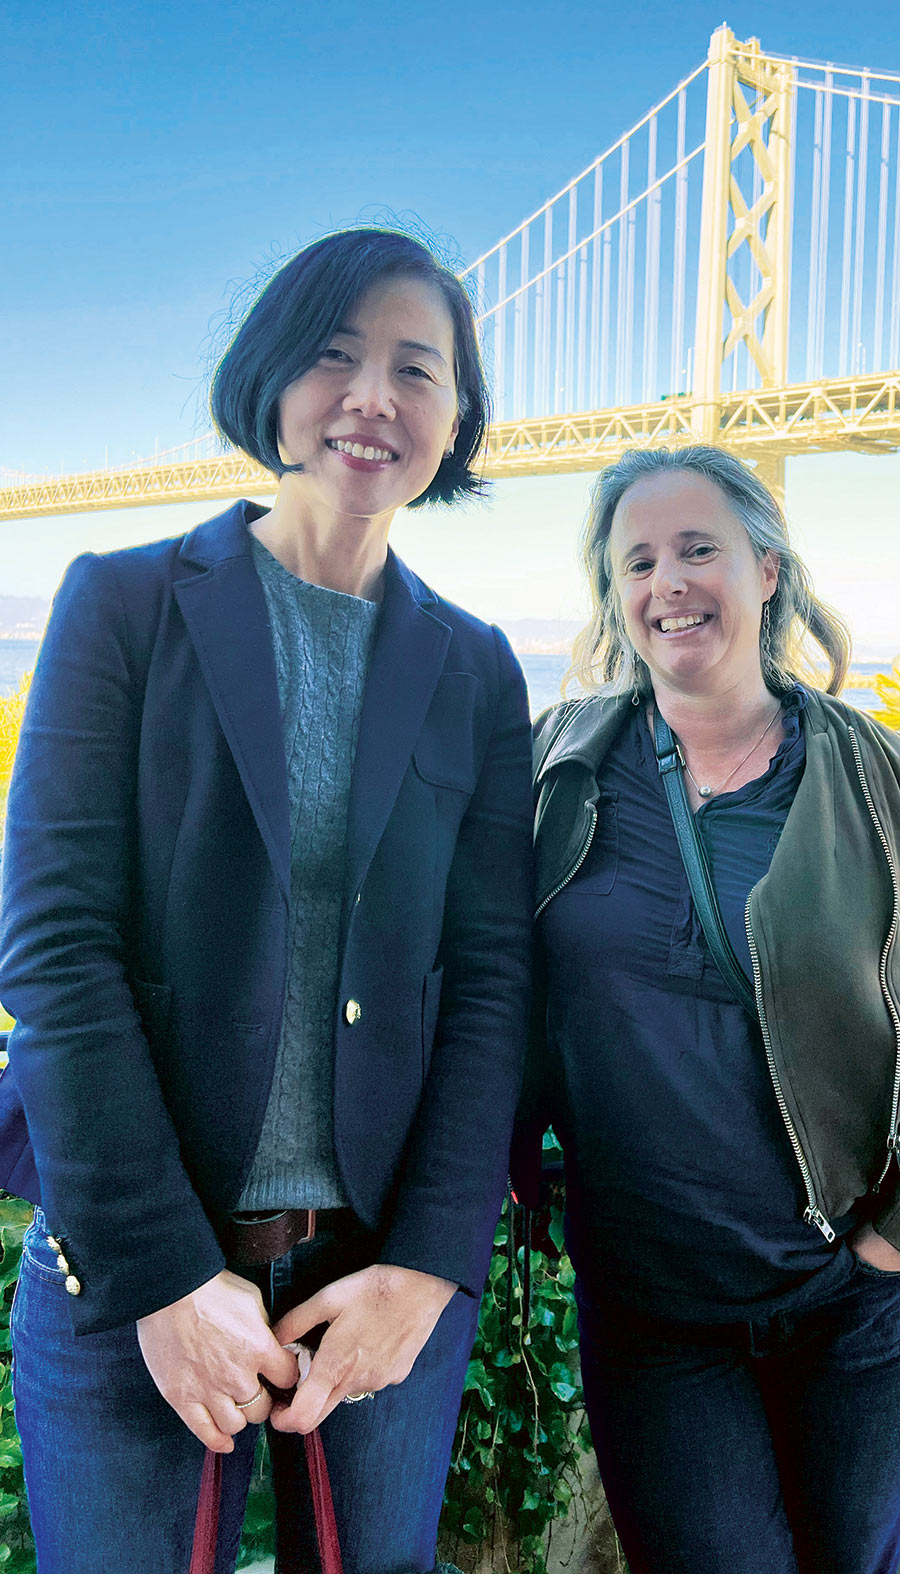 A portrait photograph of Theresa Lee and Rachel Horsch standing next to each other smiling as they pose for a picture outside